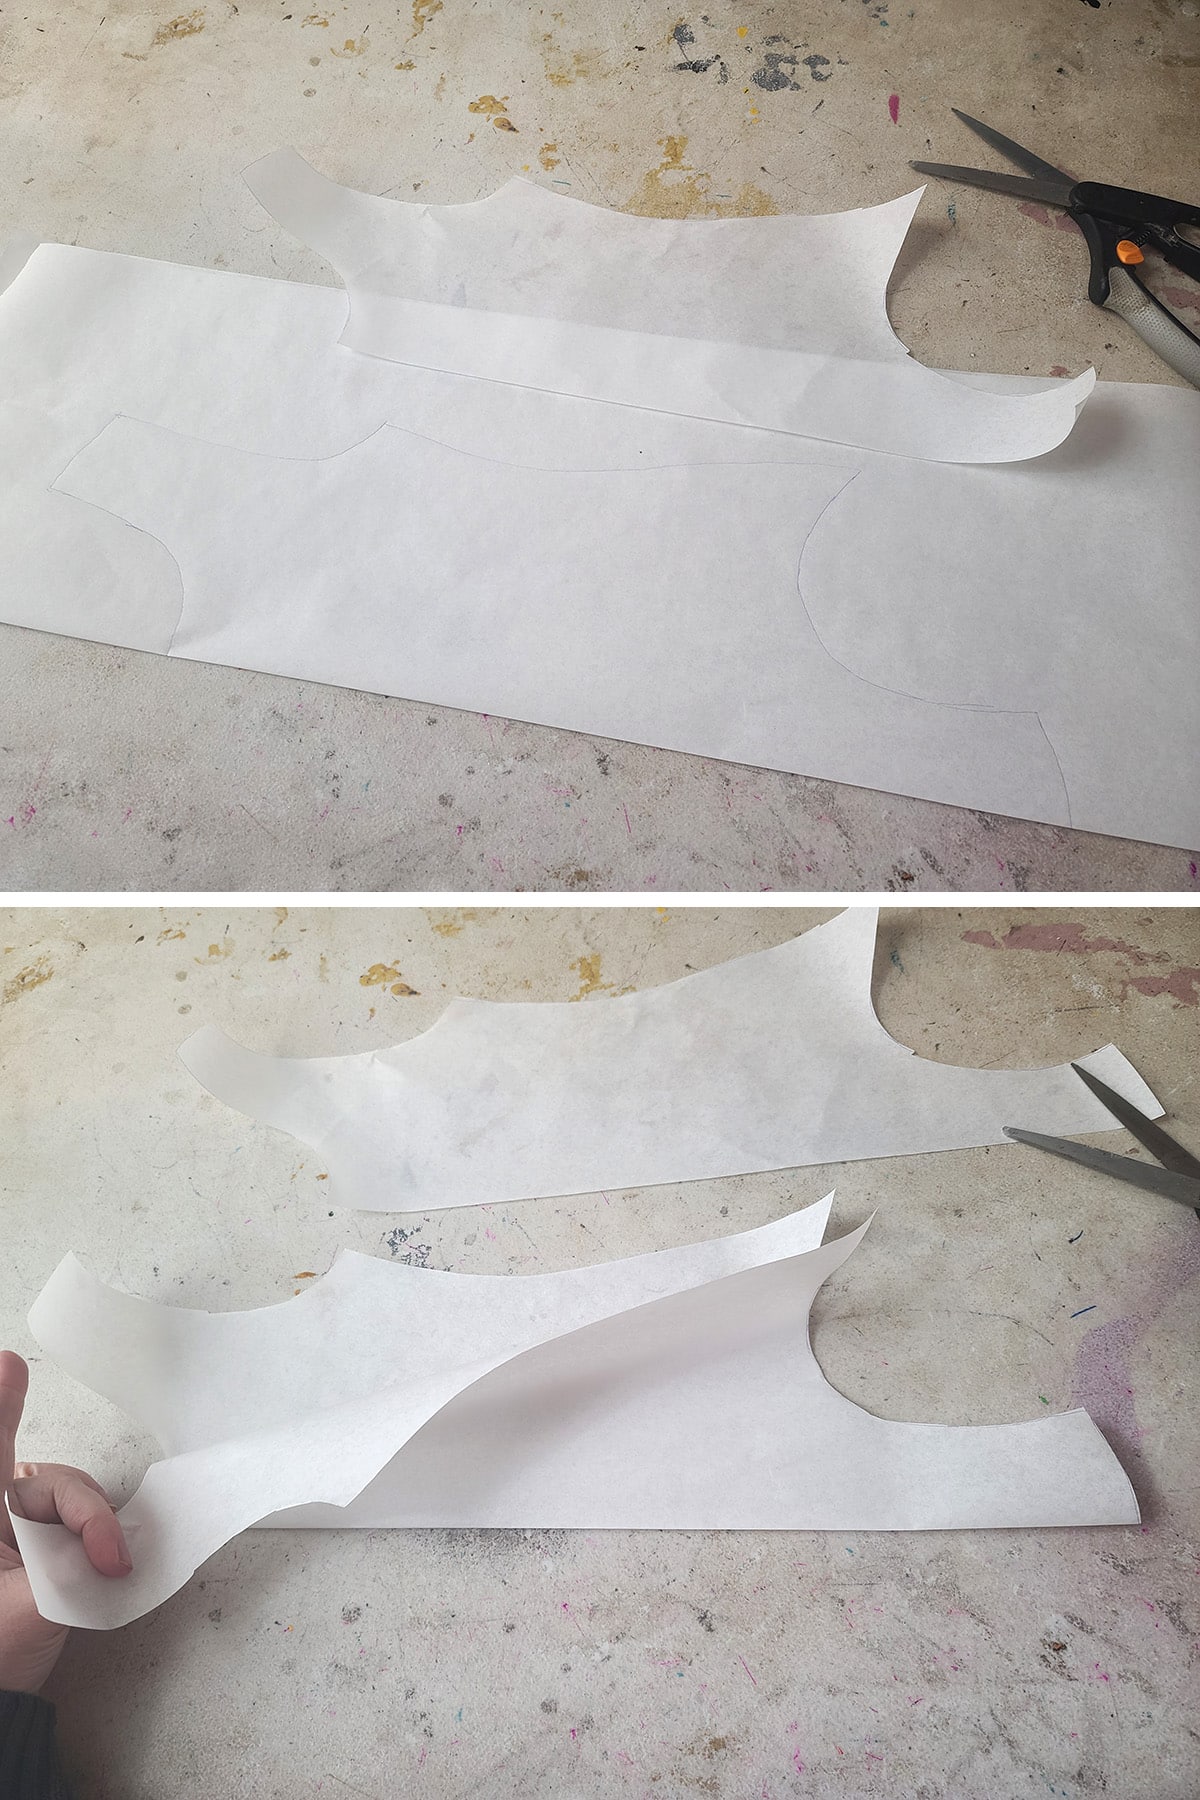 A two part compilation image showing a half-front pattern being used to cut a full pattern, when the center front is placed on a folded sheet of paper.